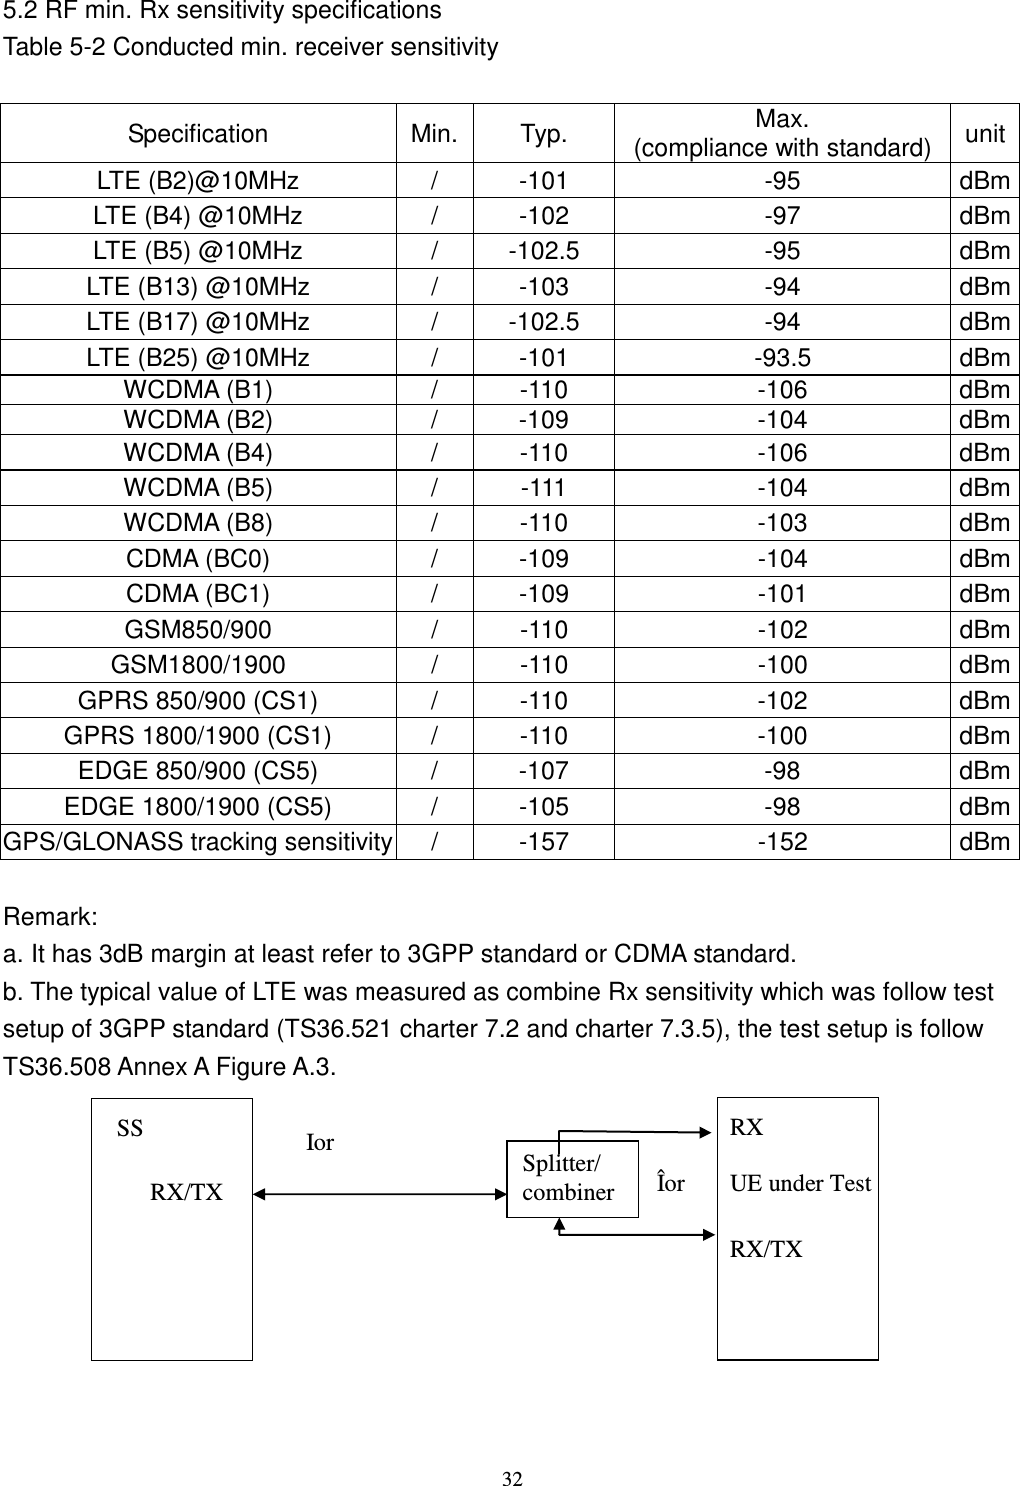    32 5.2 RF min. Rx sensitivity specifications Table 5-2 Conducted min. receiver sensitivity  Specification  Min.  Typ.  Max. (compliance with standard)  unit LTE (B2)@10MHz  /  -101  -95  dBm LTE (B4) @10MHz  /  -102  -97  dBm LTE (B5) @10MHz  /  -102.5  -95  dBm LTE (B13) @10MHz  /  -103  -94  dBm LTE (B17) @10MHz  /  -102.5  -94  dBm LTE (B25) @10MHz  /  -101  -93.5  dBm WCDMA (B1)  /  -110  -106  dBm WCDMA (B2)  /  -109  -104  dBm WCDMA (B4)  /  -110  -106  dBm WCDMA (B5)  /  -111  -104  dBm WCDMA (B8)  /  -110  -103  dBm CDMA (BC0)  /  -109  -104  dBm CDMA (BC1)  /  -109  -101  dBm GSM850/900  /  -110  -102  dBm GSM1800/1900  /  -110  -100  dBm GPRS 850/900 (CS1)  /  -110  -102  dBm GPRS 1800/1900 (CS1)  /  -110  -100  dBm EDGE 850/900 (CS5)  /  -107  -98  dBm EDGE 1800/1900 (CS5)  /  -105  -98  dBm GPS/GLONASS tracking sensitivity /  -157  -152  dBm  Remark:   a. It has 3dB margin at least refer to 3GPP standard or CDMA standard. b. The typical value of LTE was measured as combine Rx sensitivity which was follow test setup of 3GPP standard (TS36.521 charter 7.2 and charter 7.3.5), the test setup is follow TS36.508 Annex A Figure A.3.    SS RX/TX RX  UE under Test RX/TX Ior Îor Splitter/ combiner 